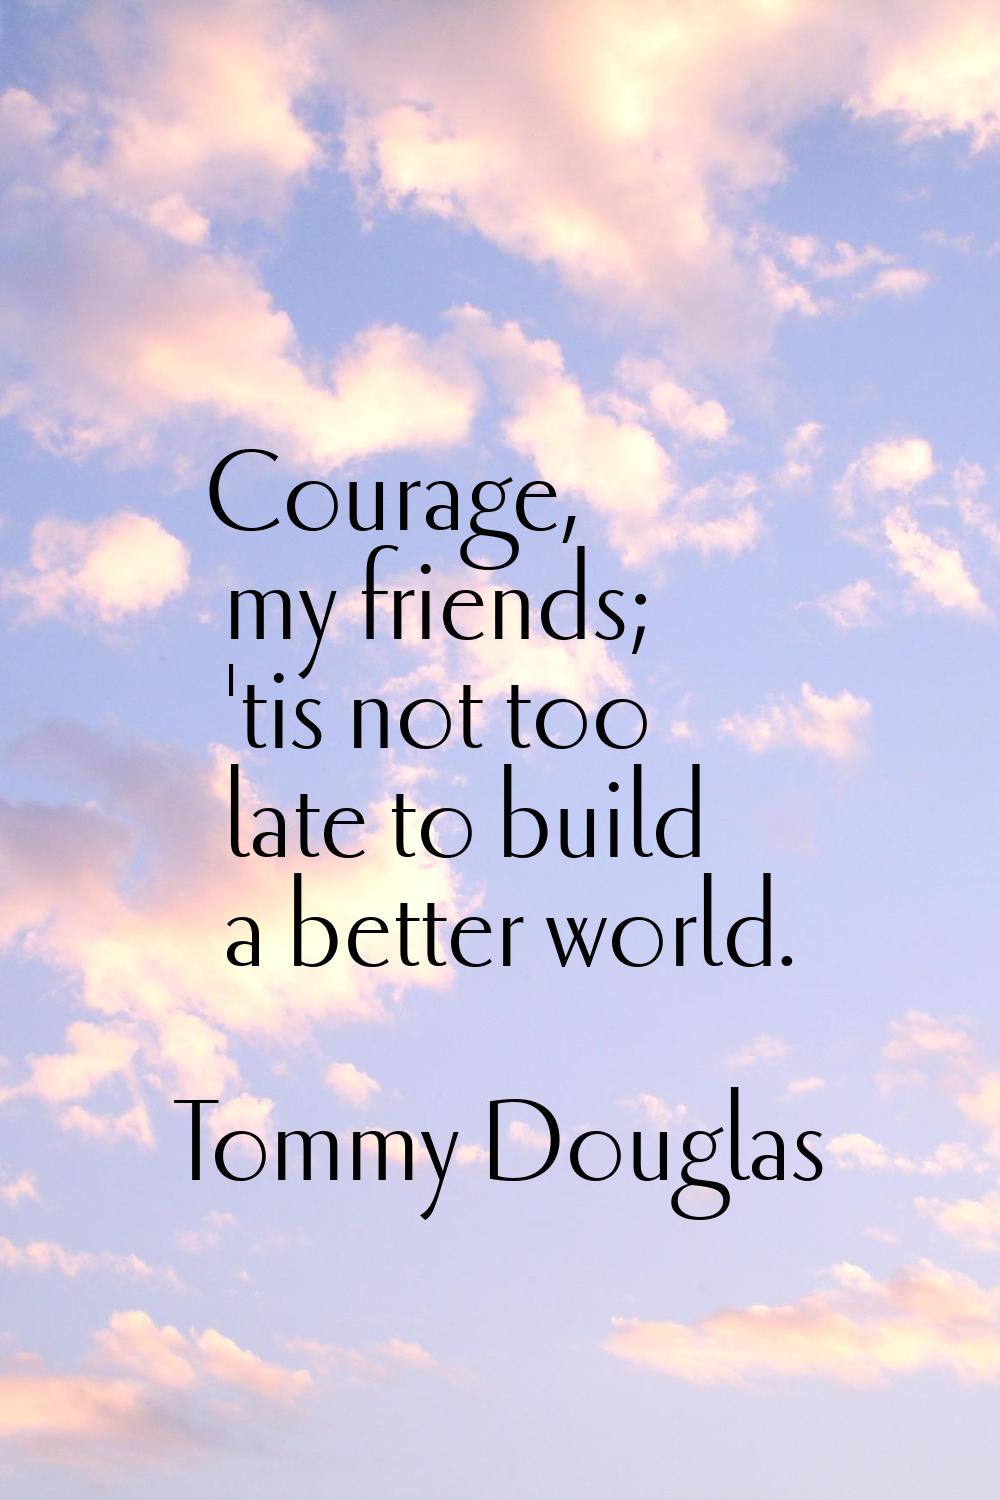 Courage, my friends; 'tis not too late to build a better world.